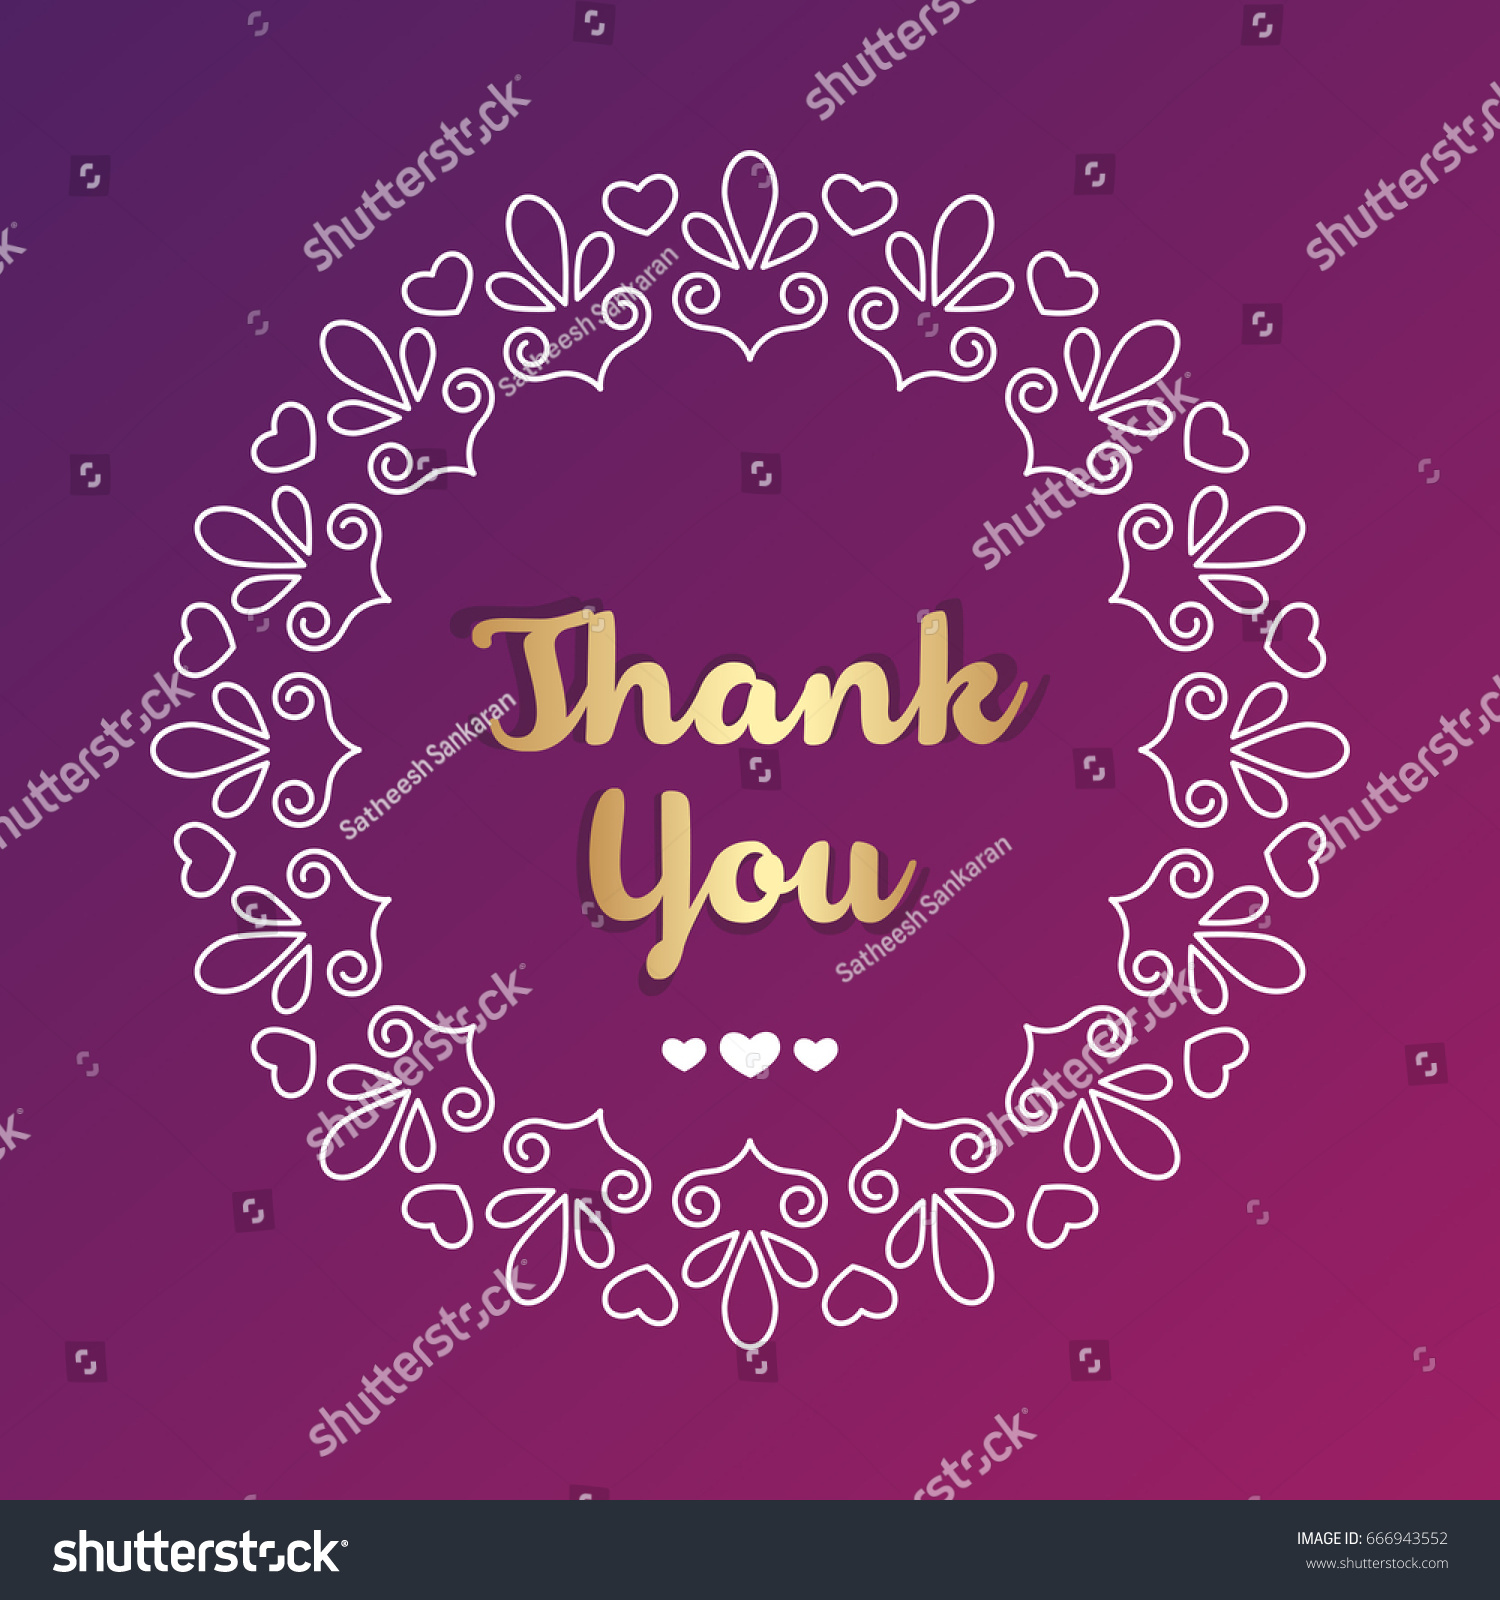 Thank You Hand Lettering Decorative Typography Stock Vector Royalty Free 666943552